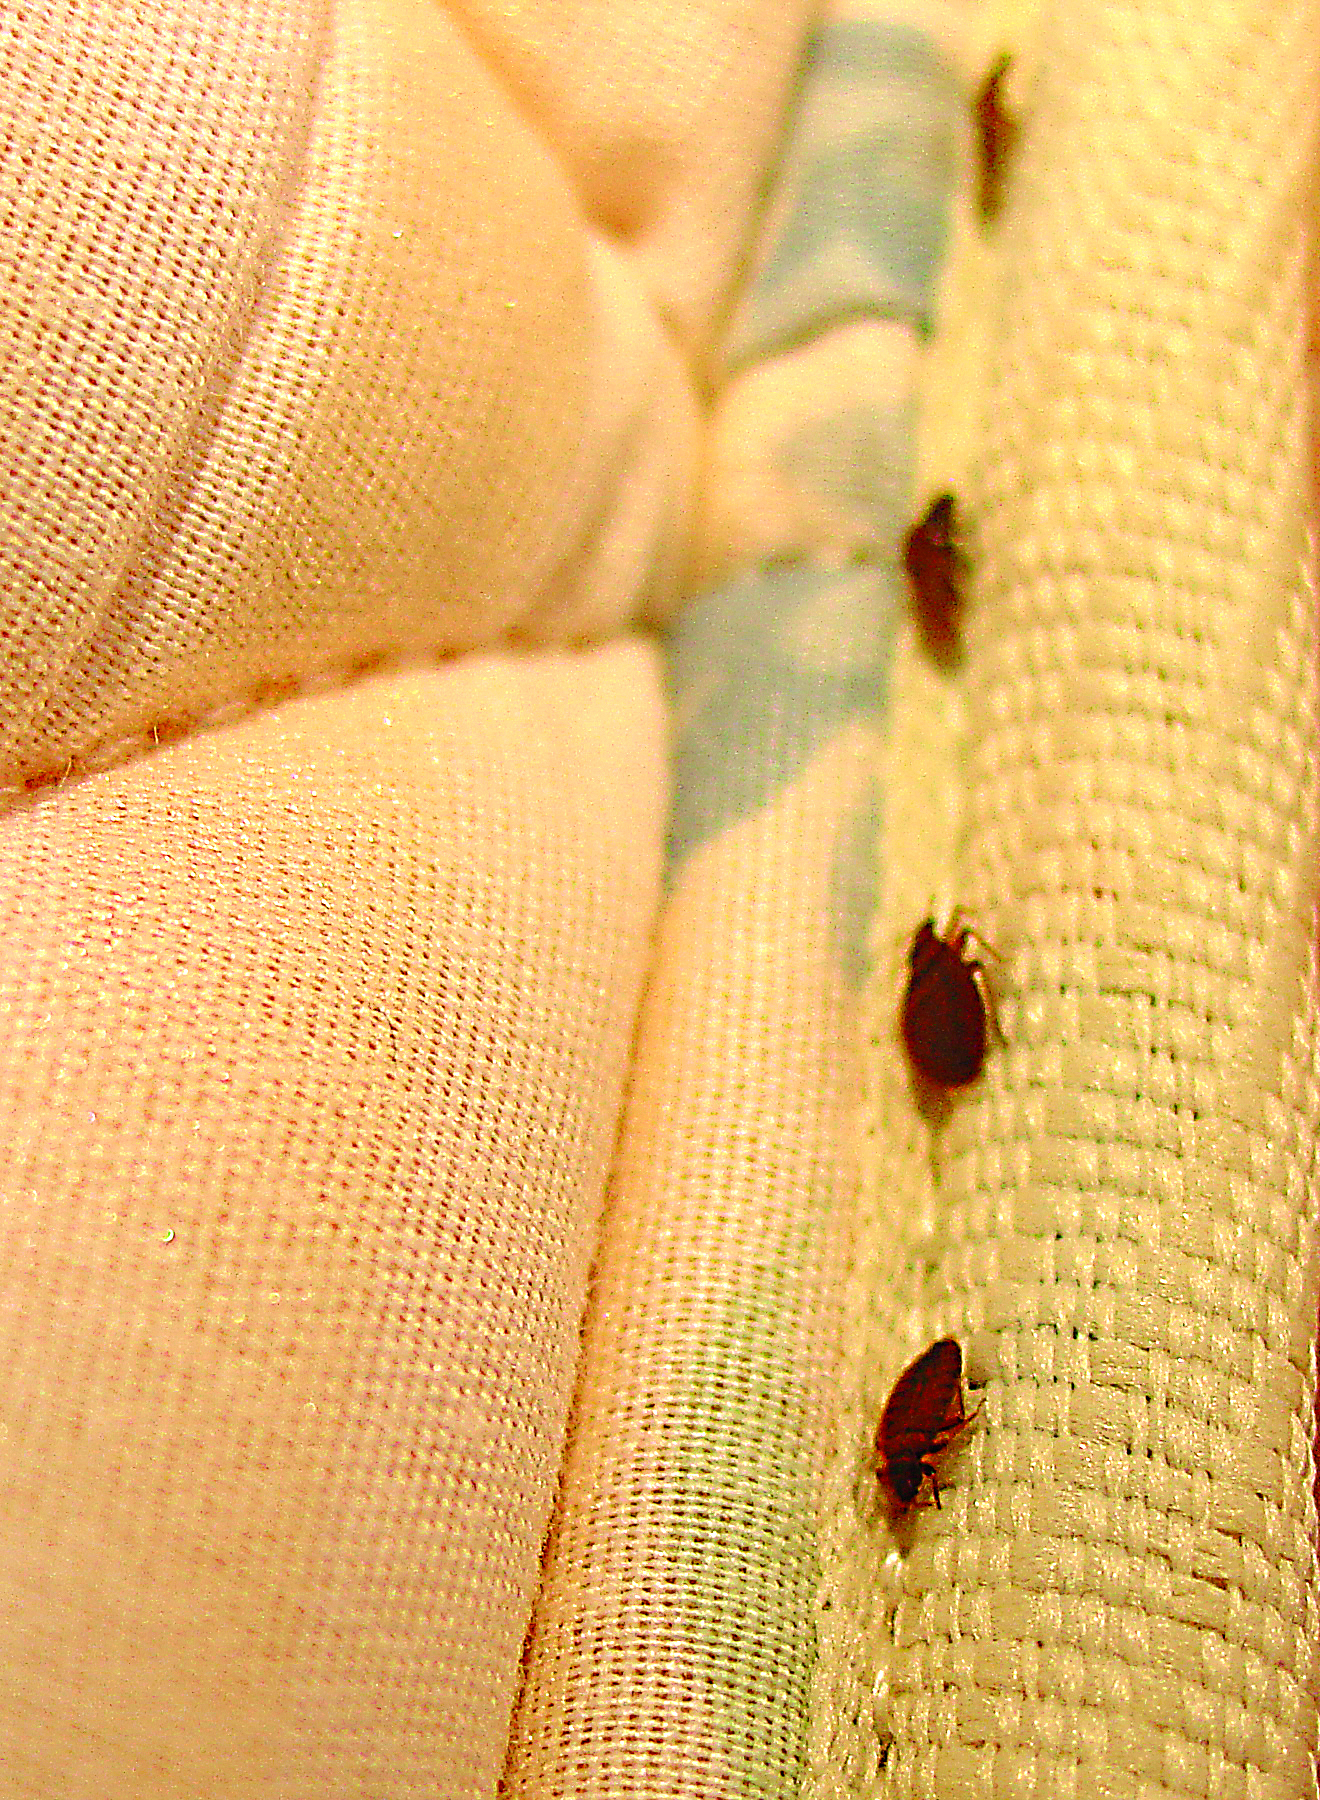 bed bug mattress cover lowes